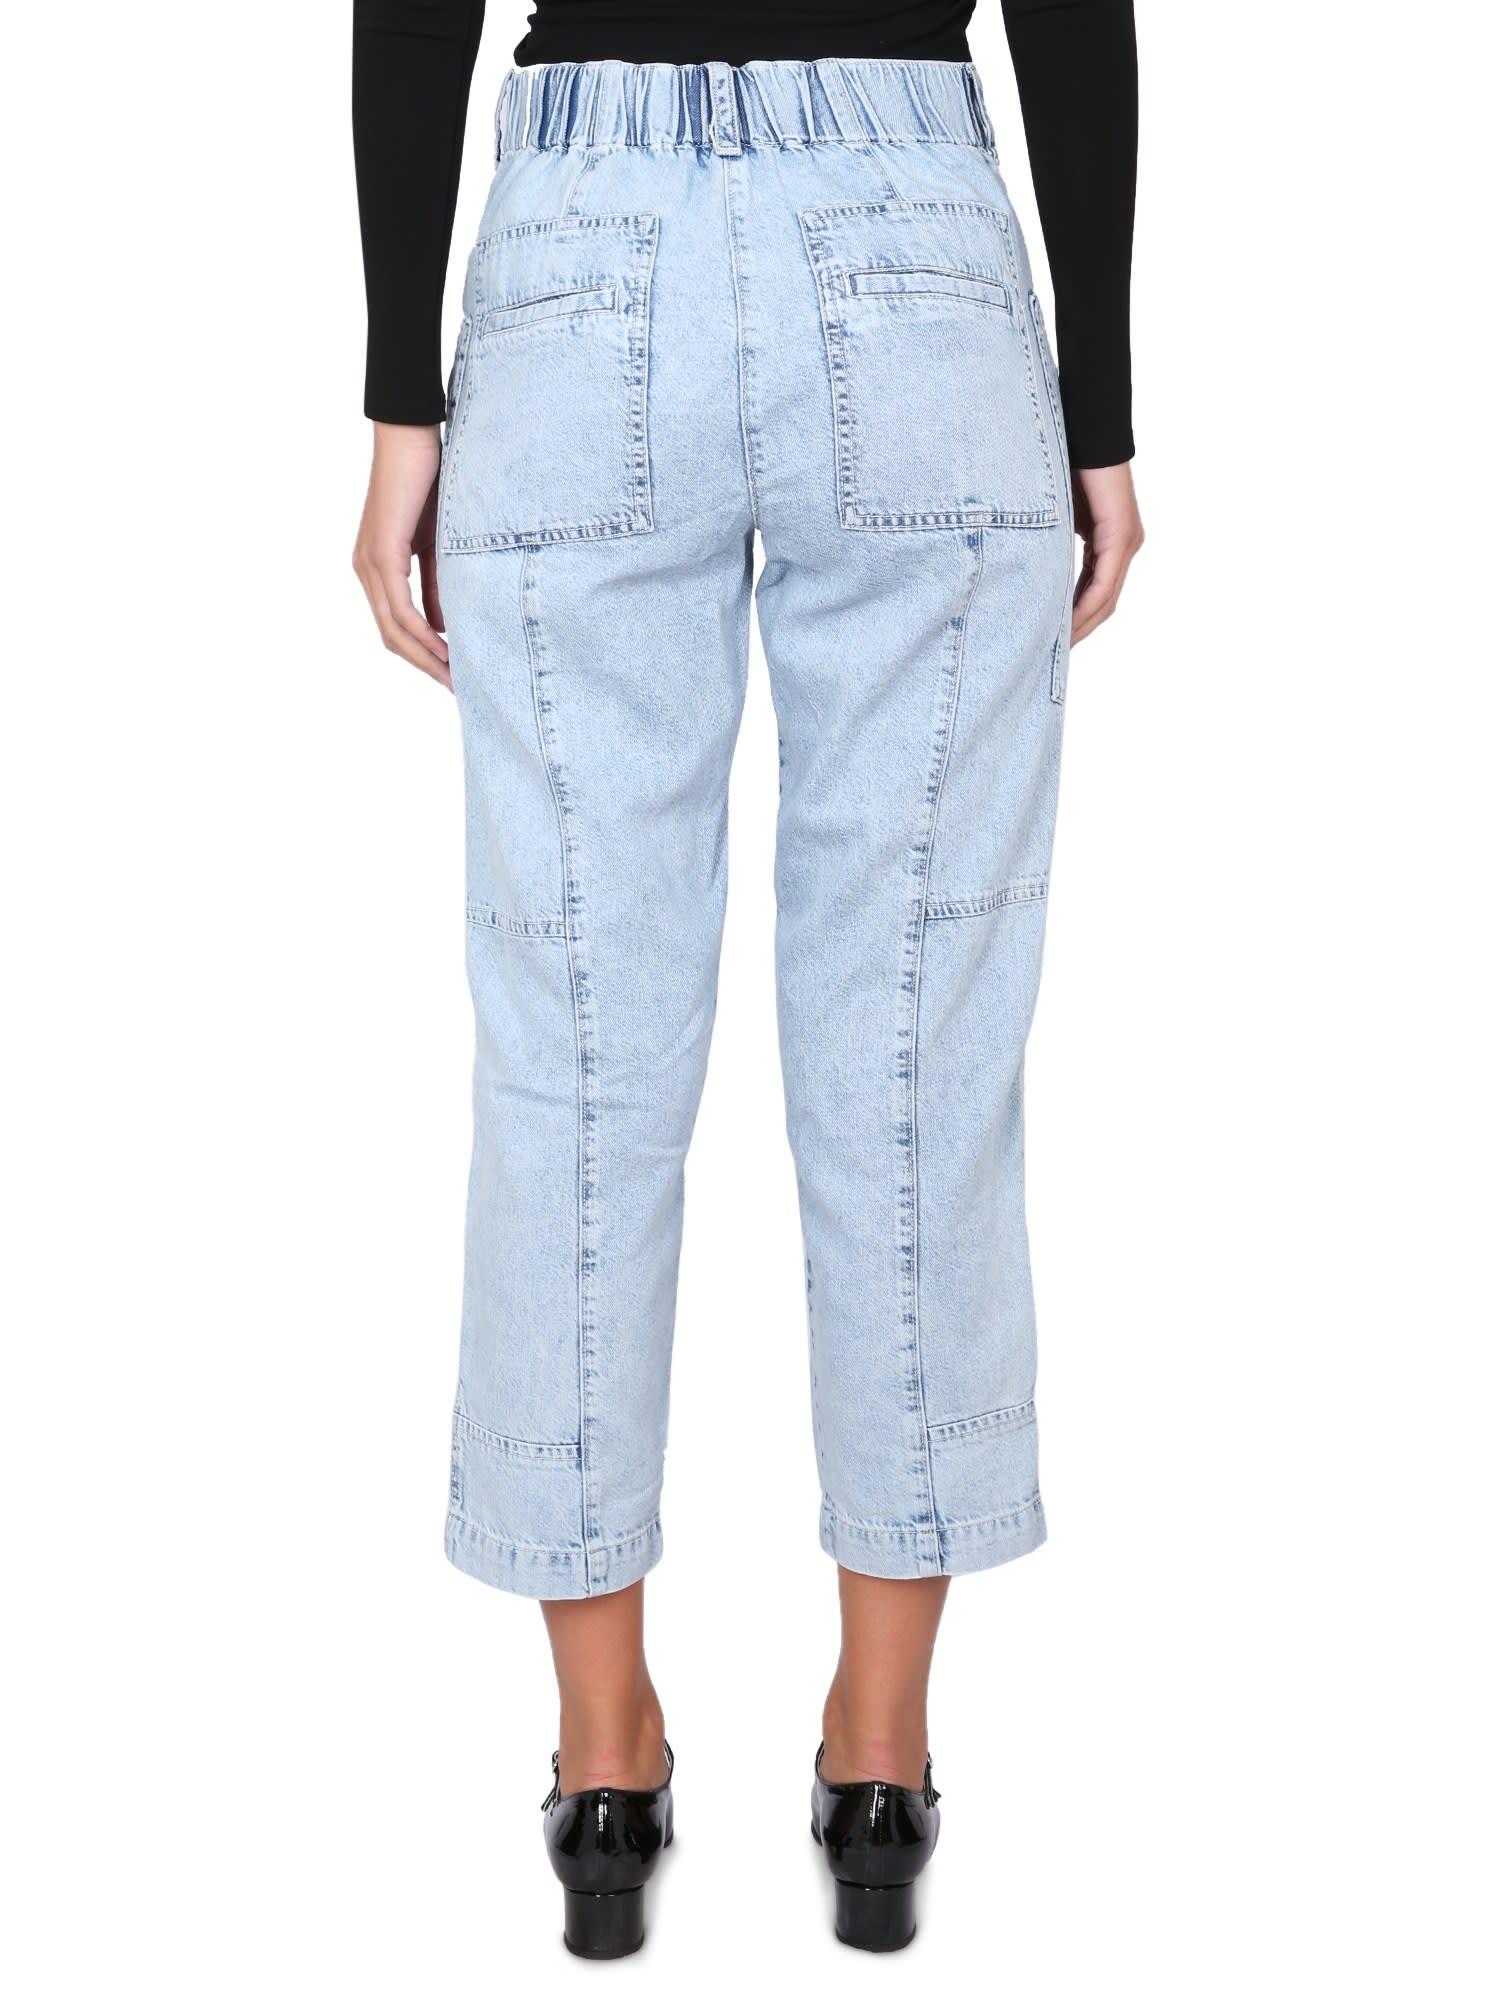 PROENZA SCHOULER WHITE LABEL Chambray Jeans in Blue | Lyst